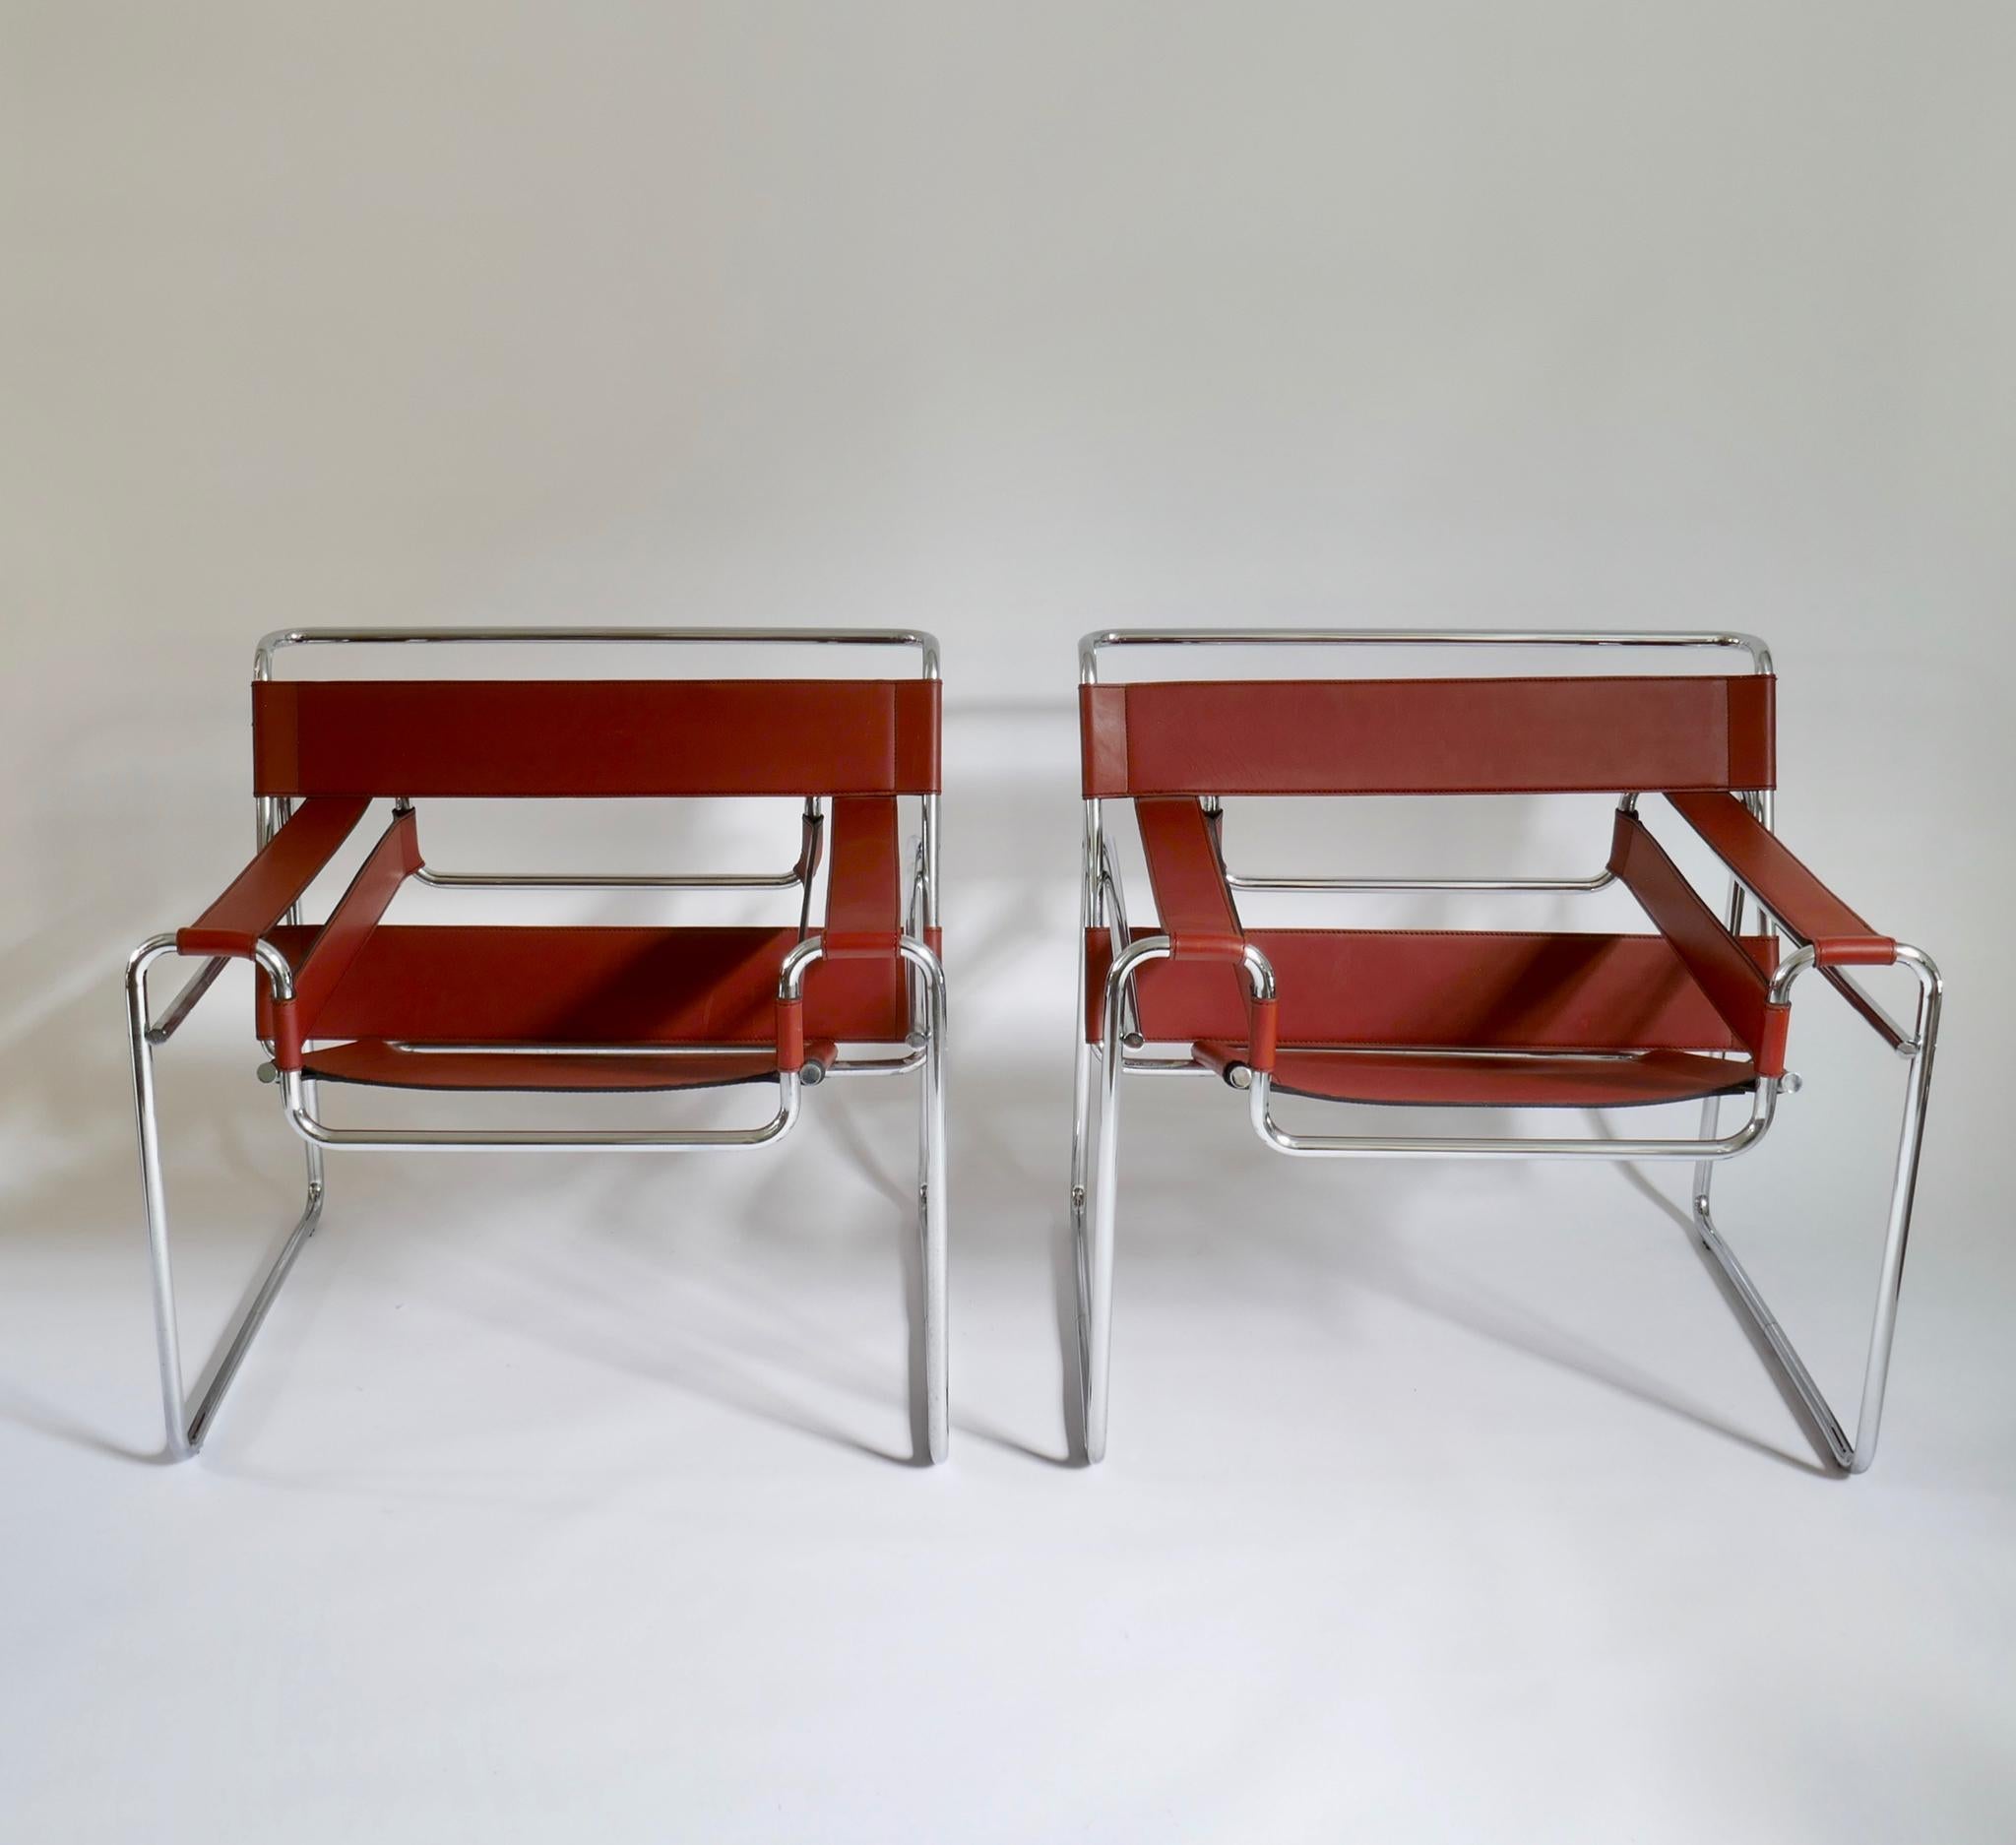 Pair of Marcel Breuer style brown or burgundy leather wassily chairs.